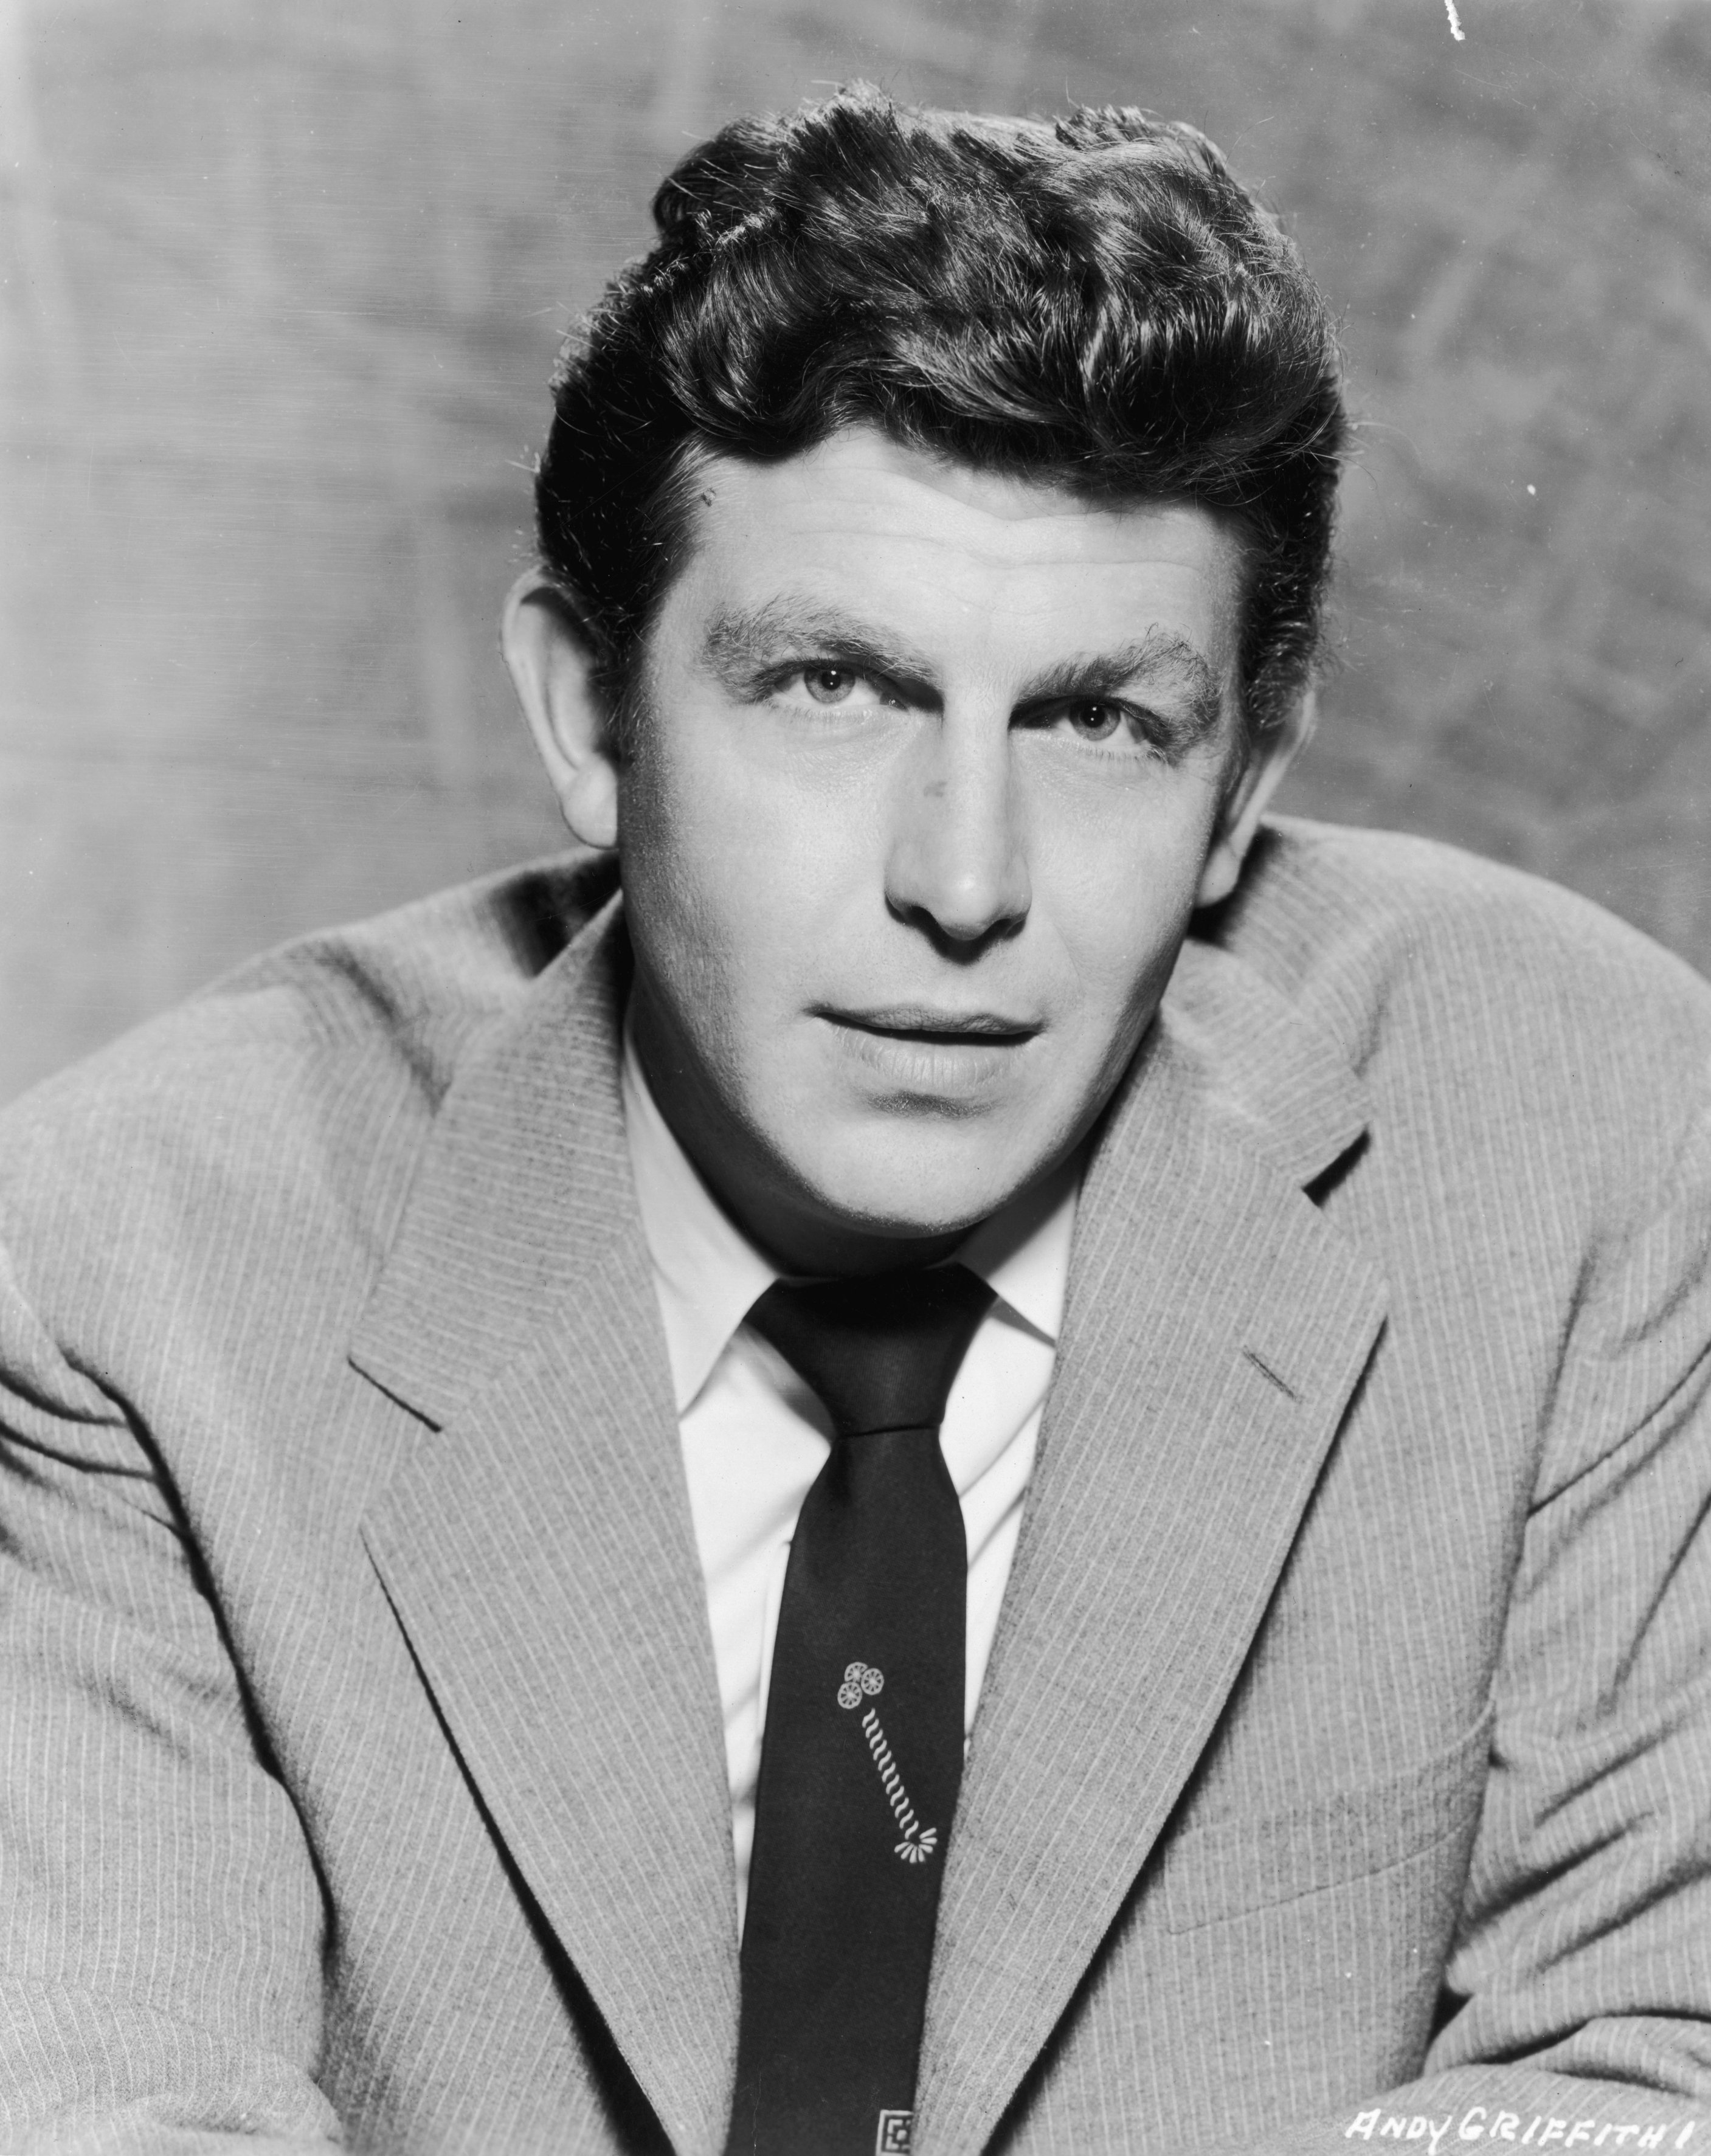 Promotional headshot portrait of actor Andy Griffith, for director Norman Taurog's film, 'Onionhead'. | Source: Getty Images